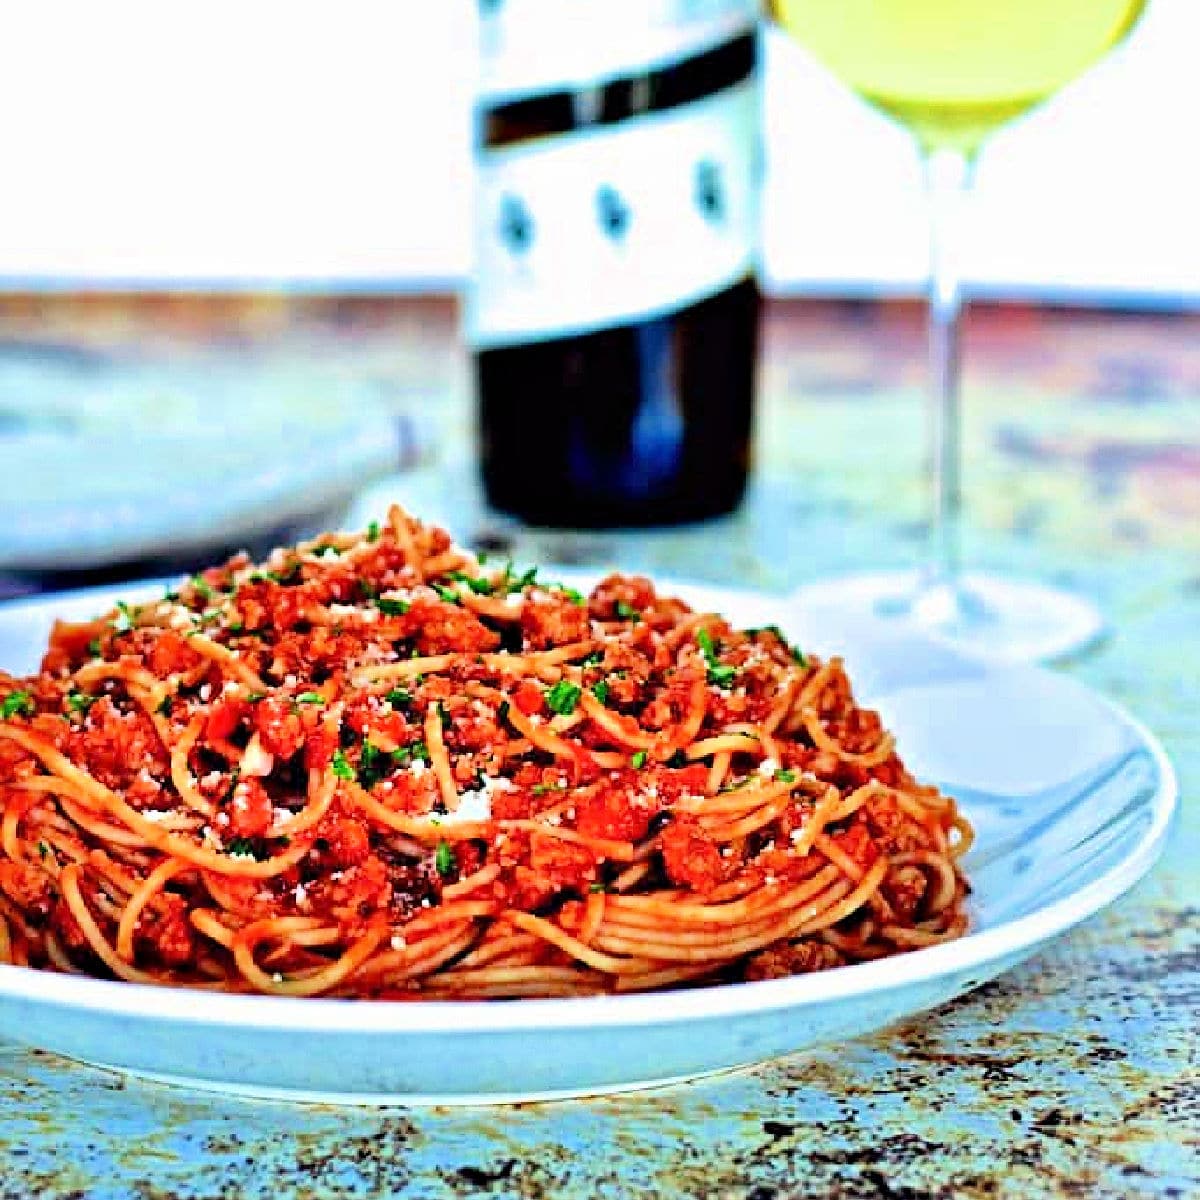 Spaghetti with healthy turkey bolognese sauce in a white bowl with a bottle and glass of white wine in the background.